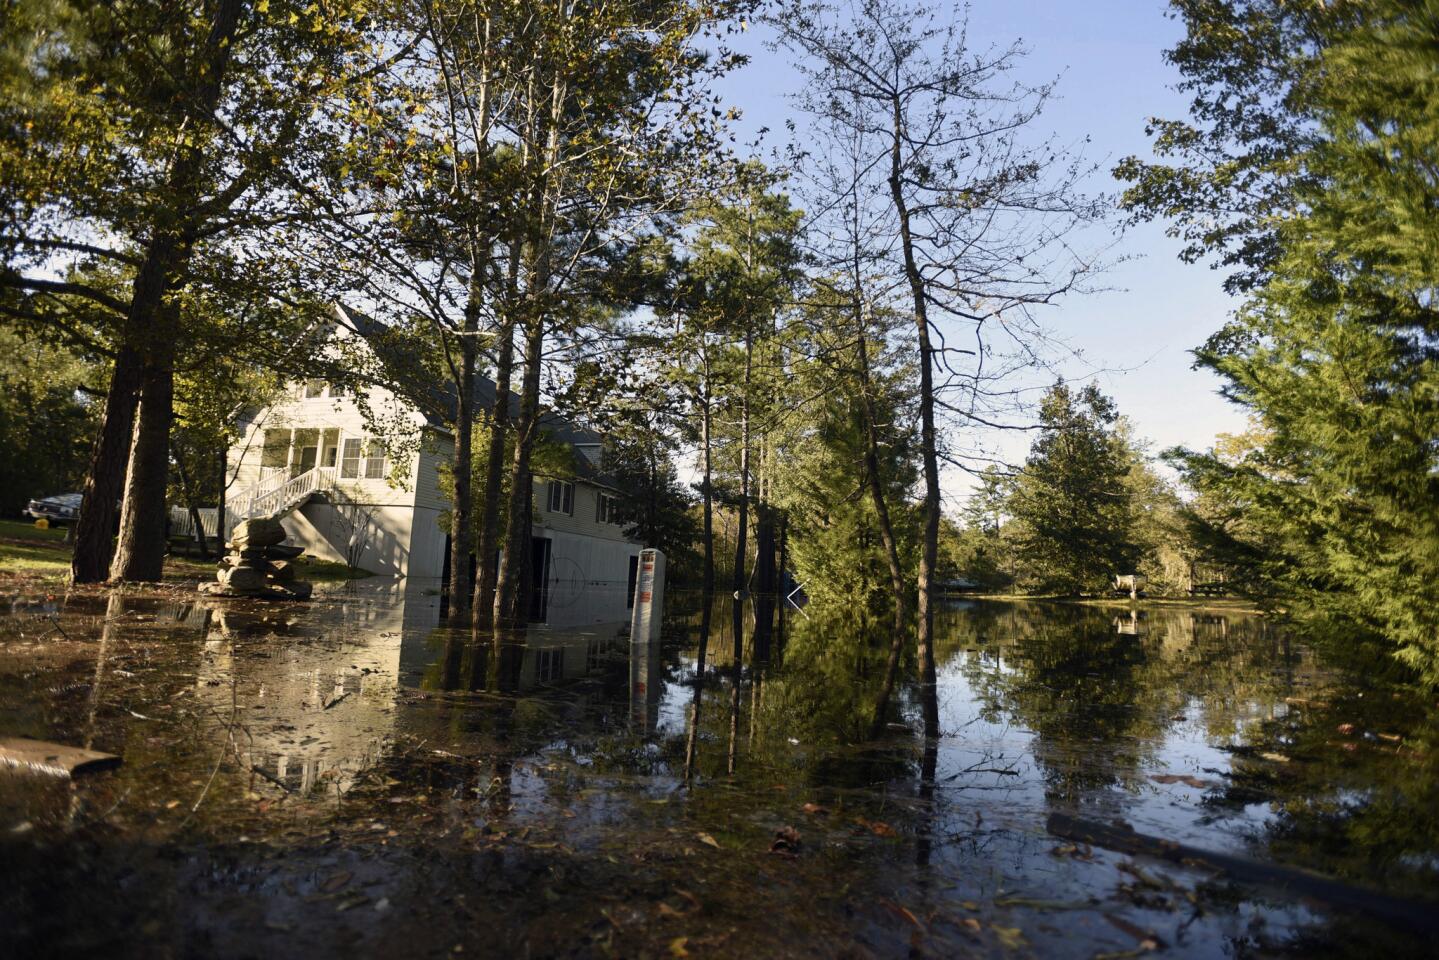 Floodwaters begin to come into the yards of homes along Wido Moore Drive on Oct. 11, 2016, in Currie, North Carolina.